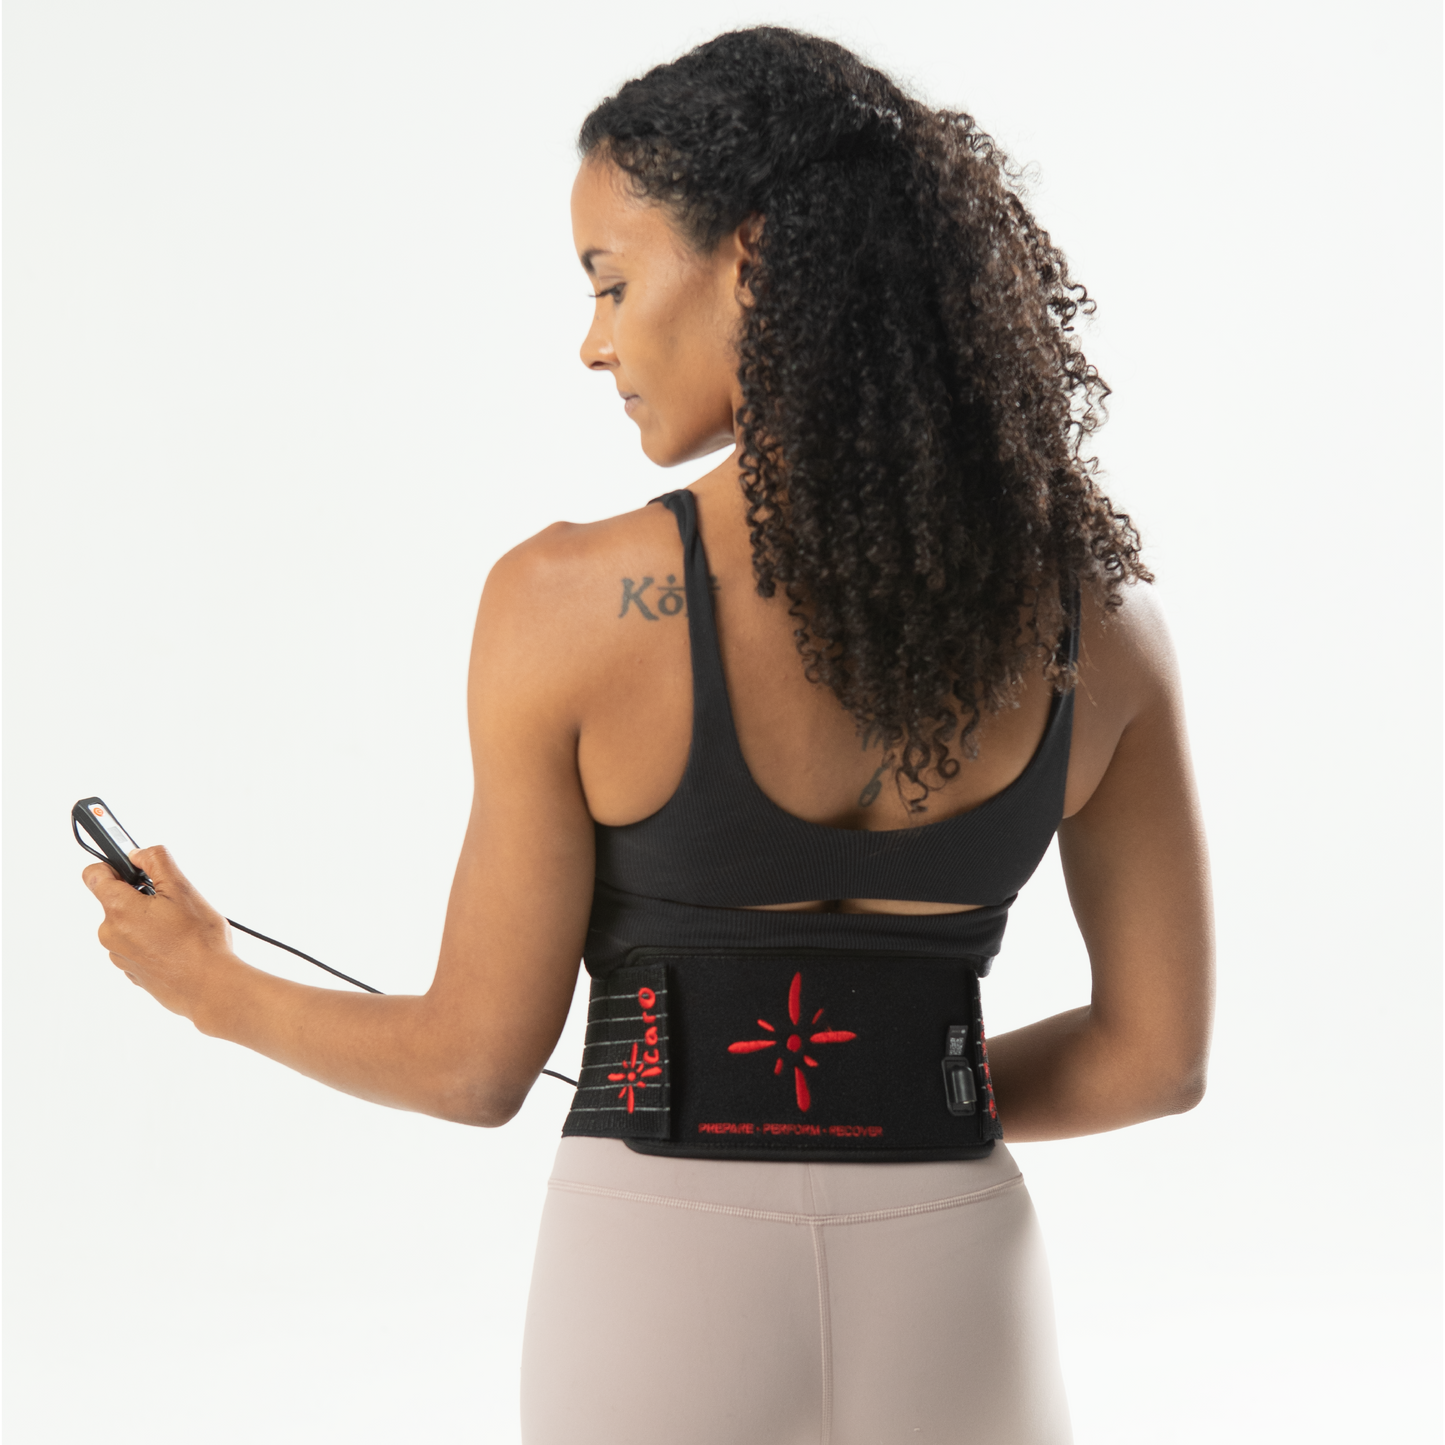 UPRight Spine Support + Far Infrared (F.I.R) Therapy